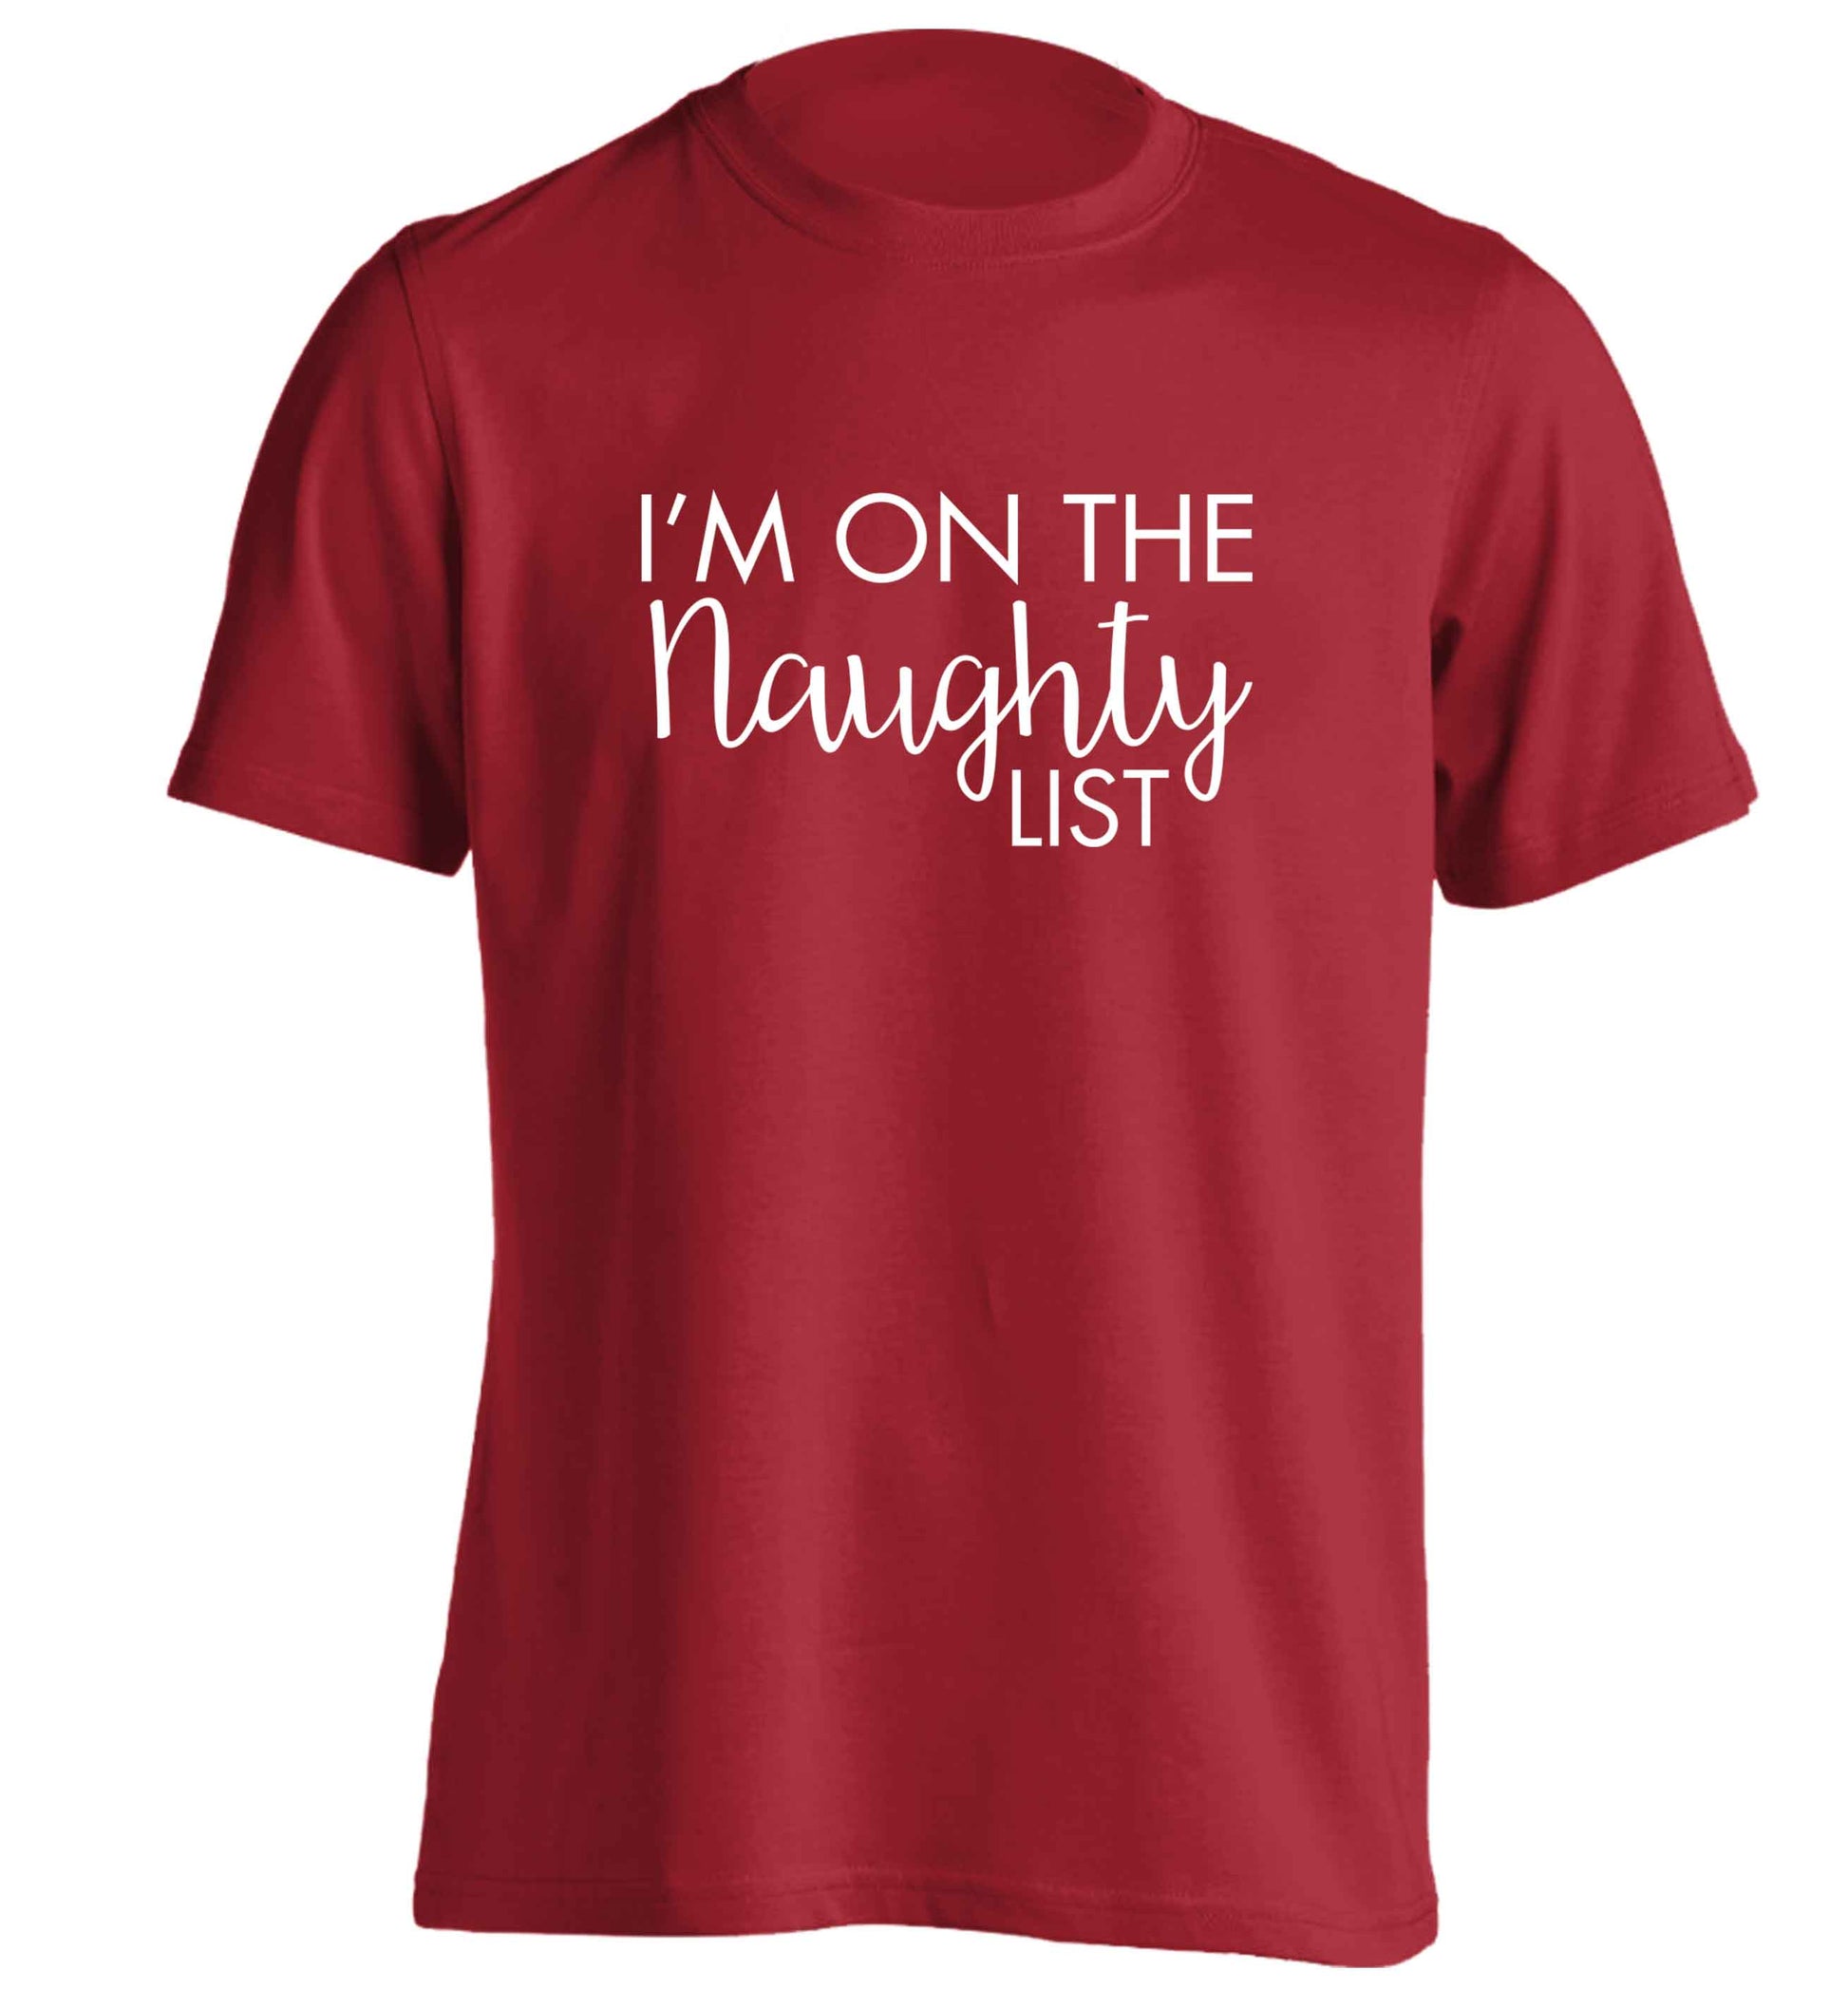 I'm on the naughty list adults unisex red Tshirt 2XL